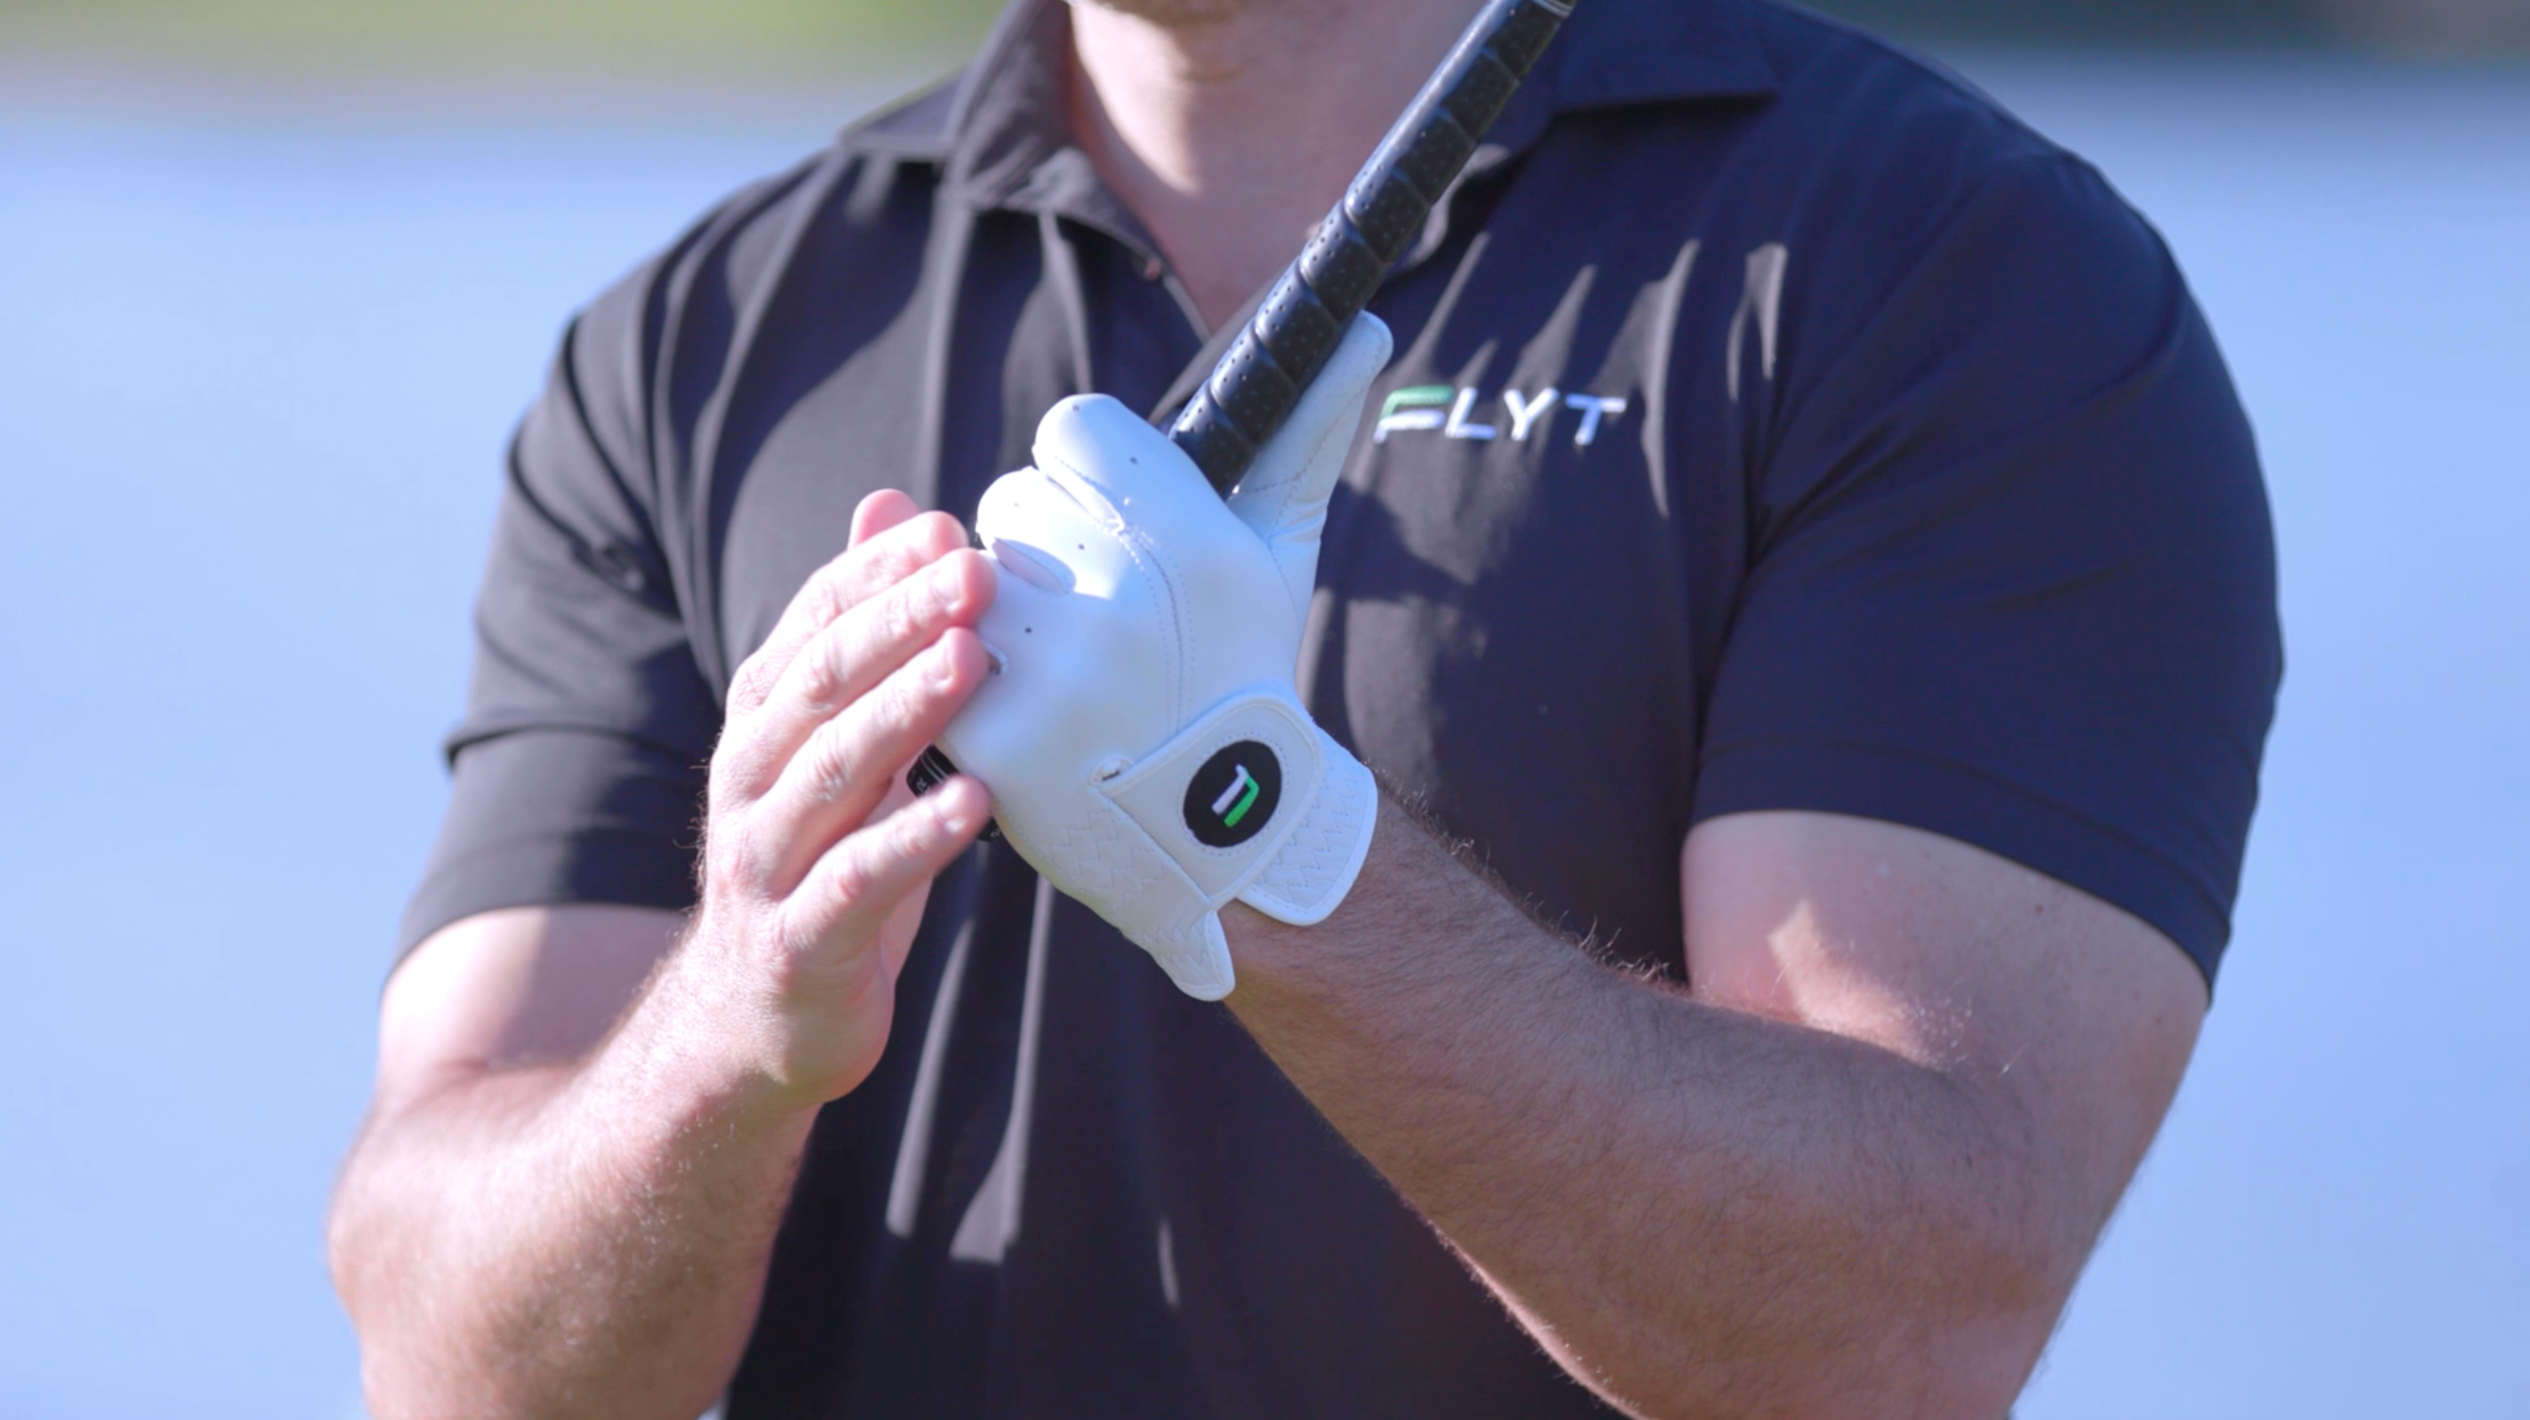 Proper Golf Grip: A Quick Test of Your Grip on the Club